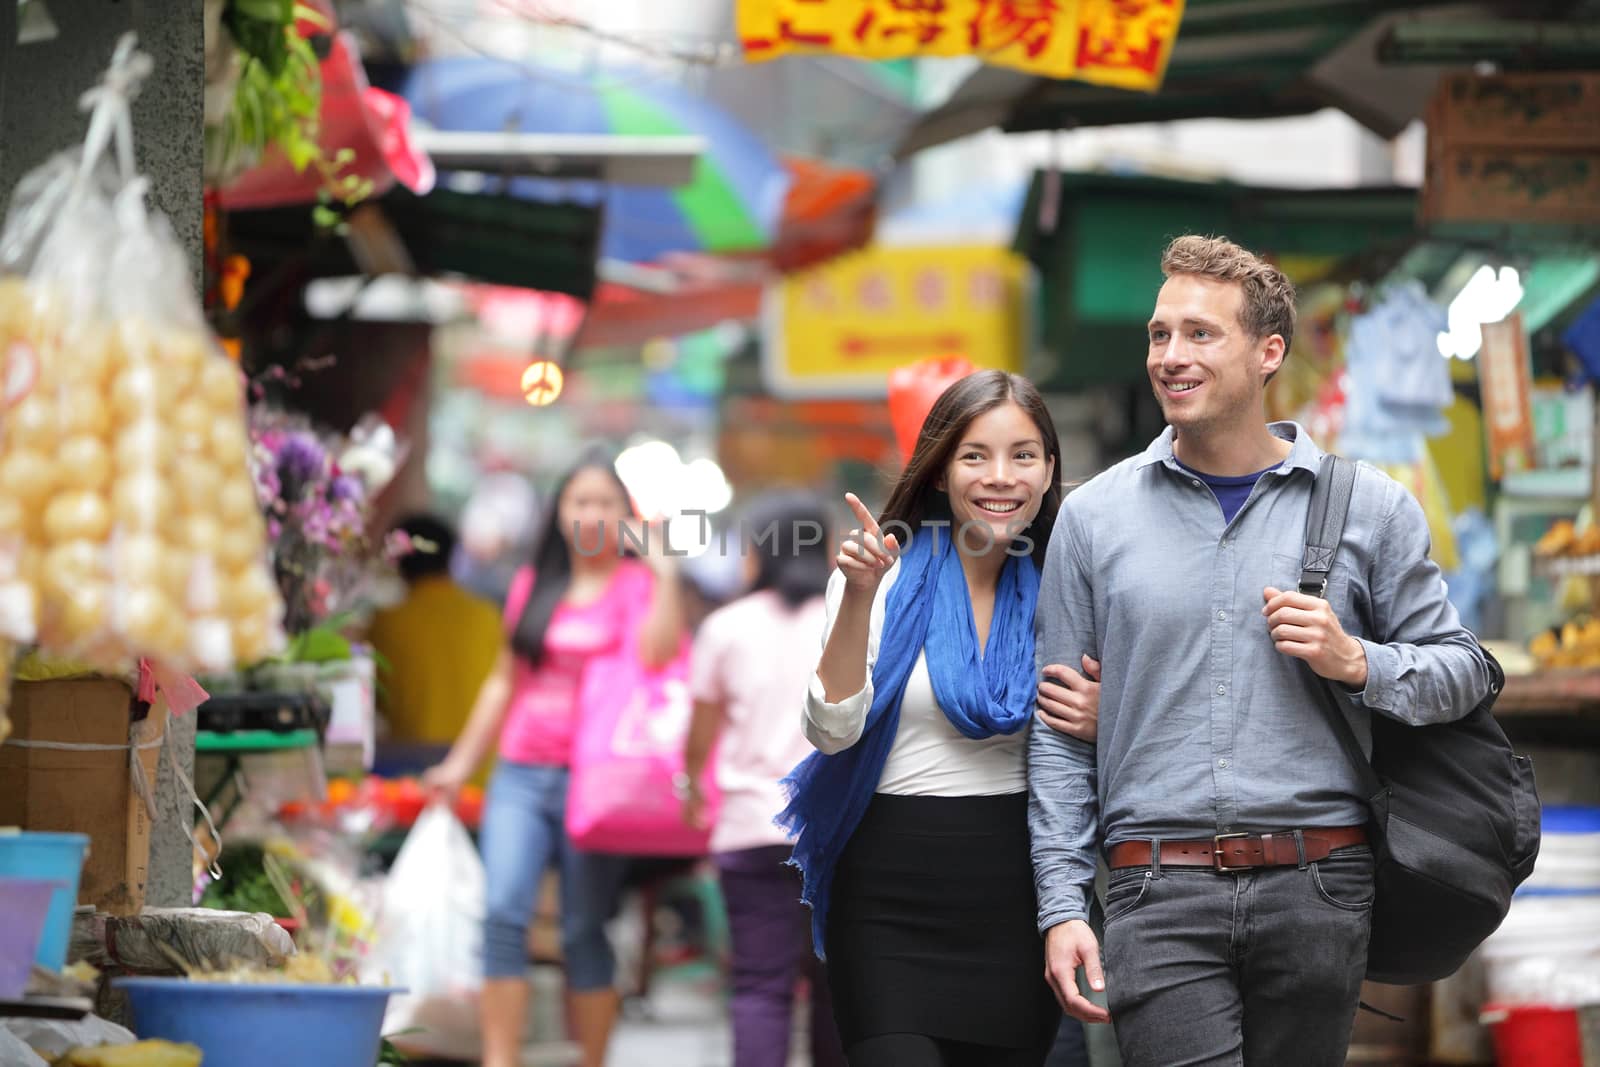 Tourists shopping in street market in Hong Kong. Couple walking looking around at small shops. Asian woman, Caucasian man.